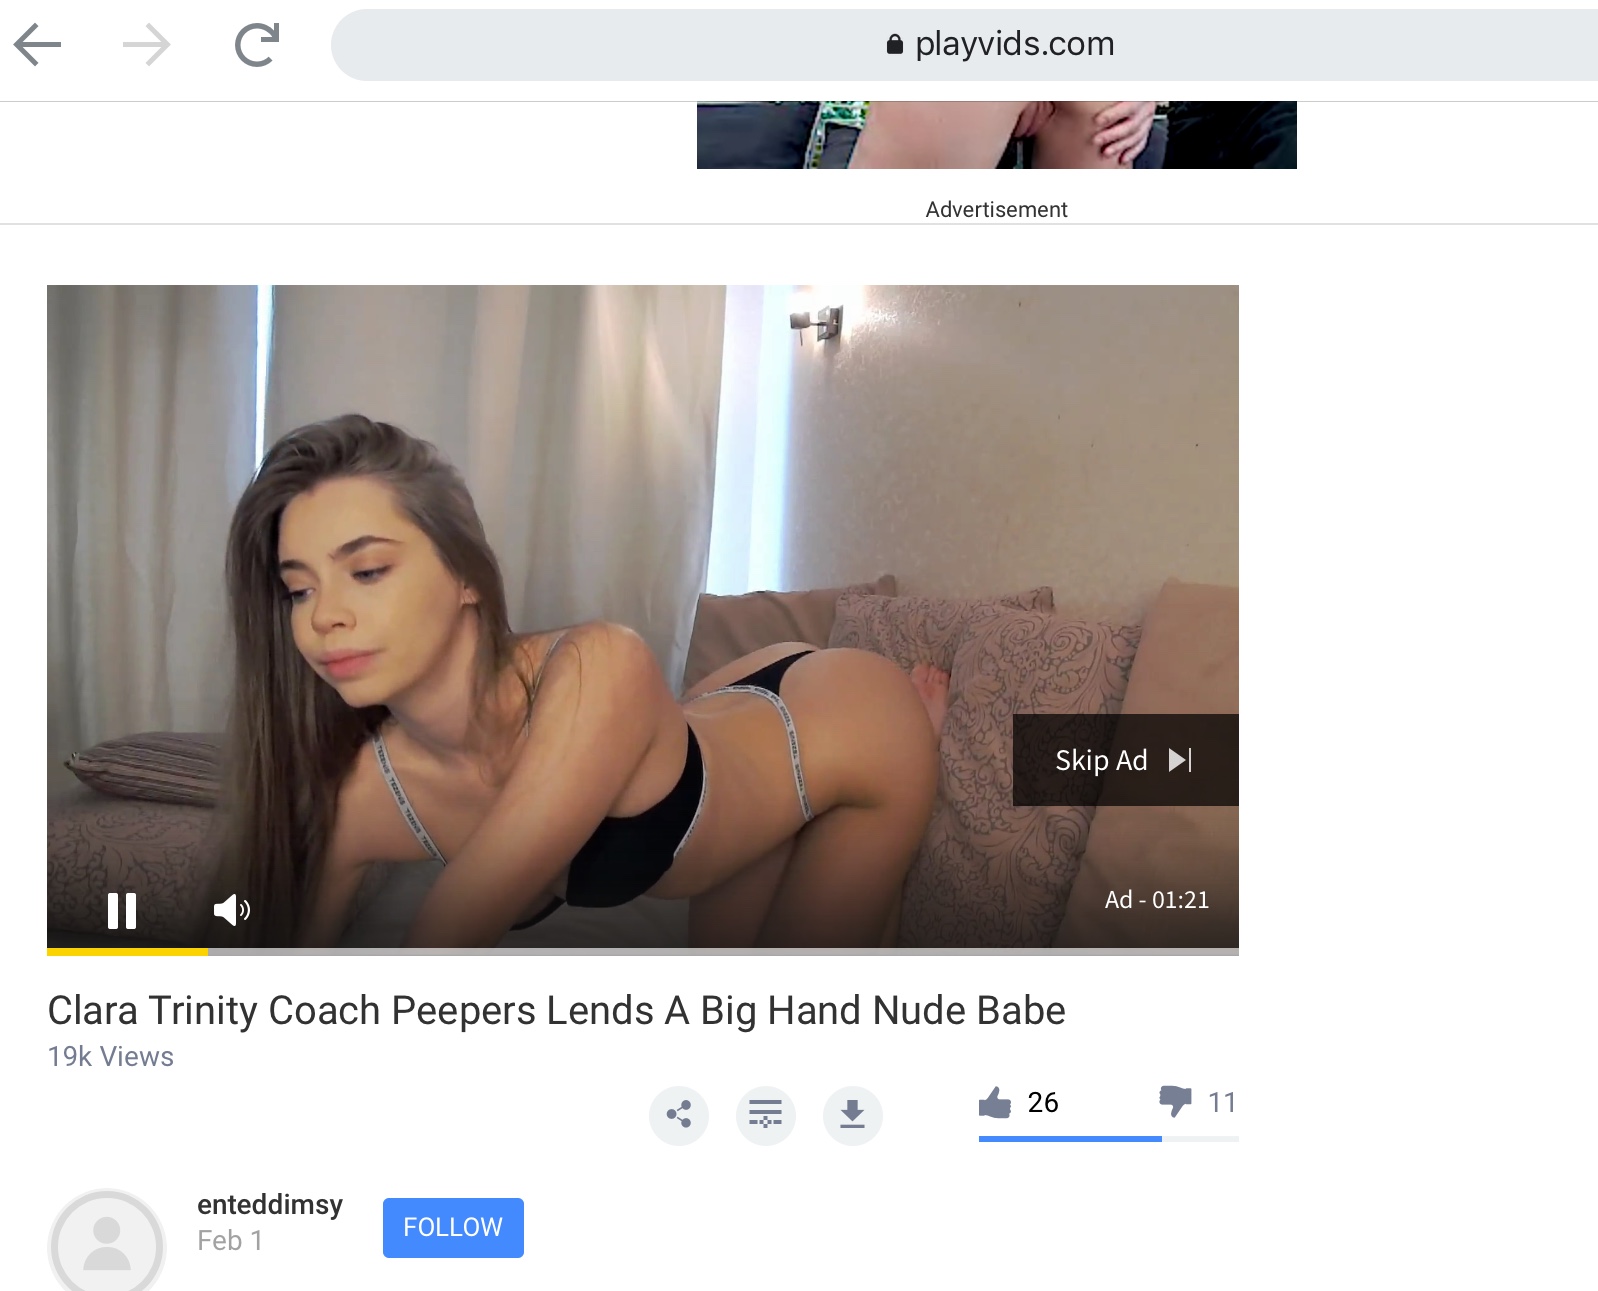 Girls In Porn Ads - Name of this girl in this porn ad? Please & thank you :) : r/tipofmypenis